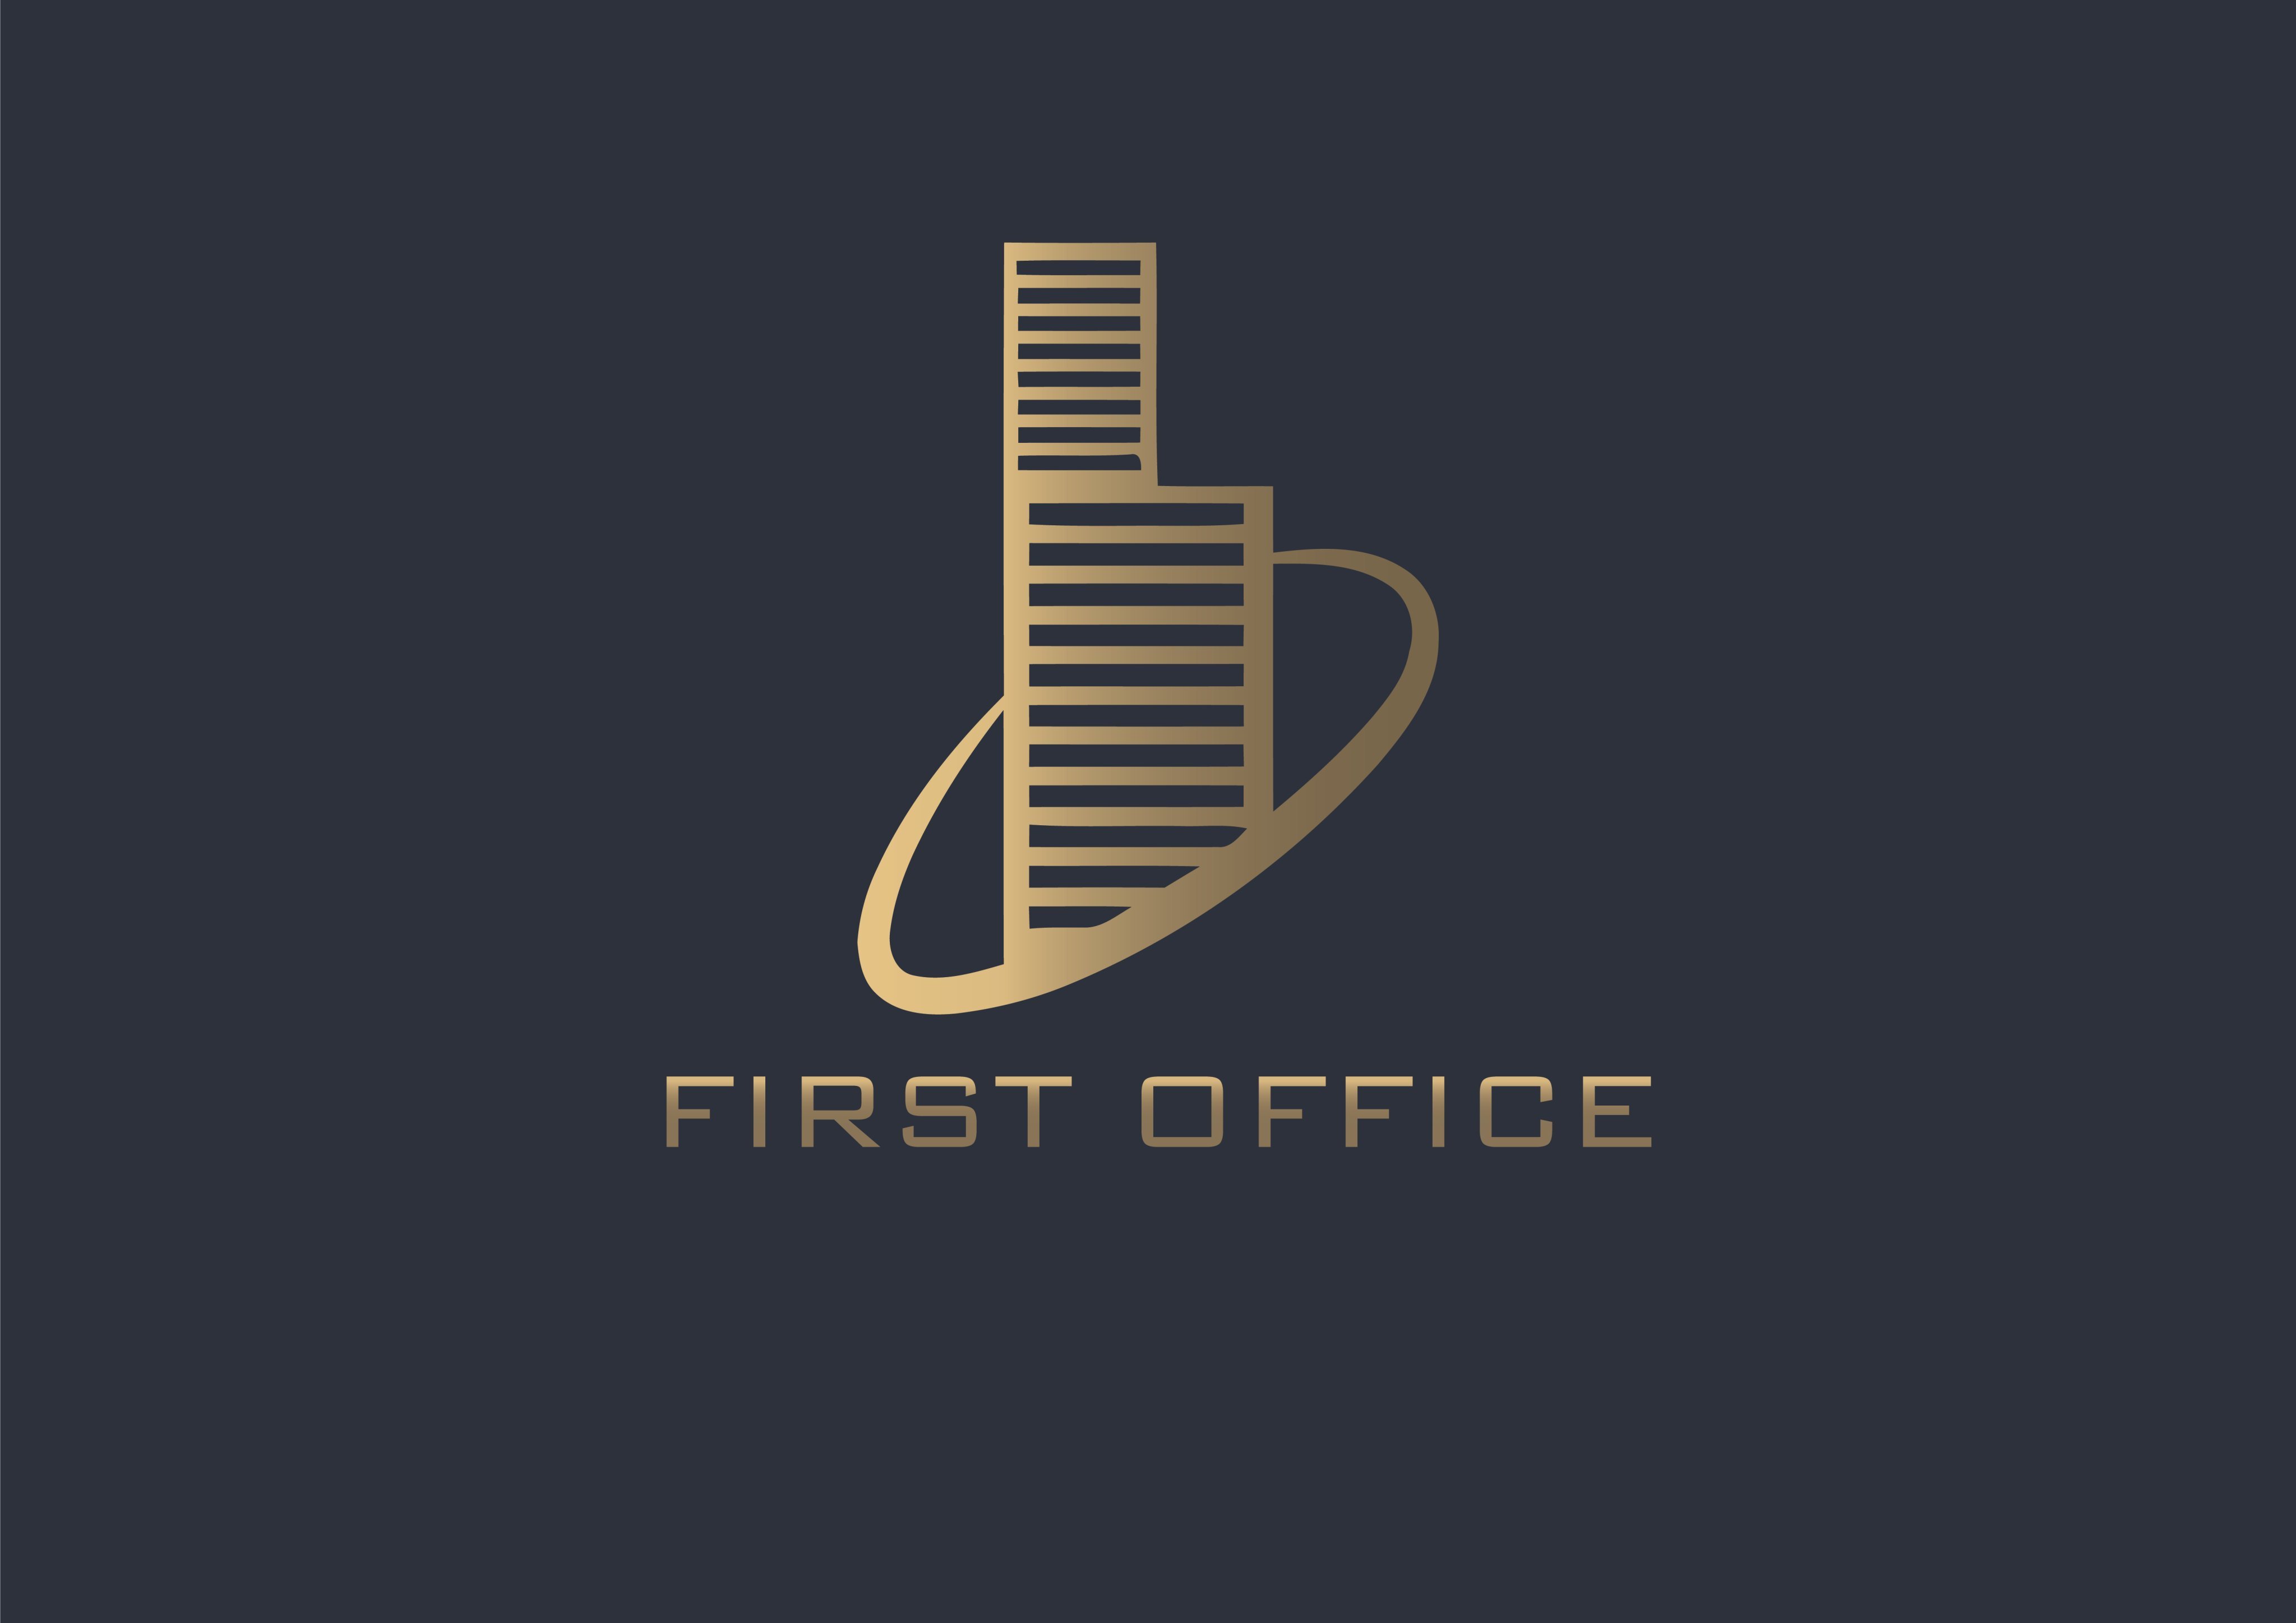 First Office